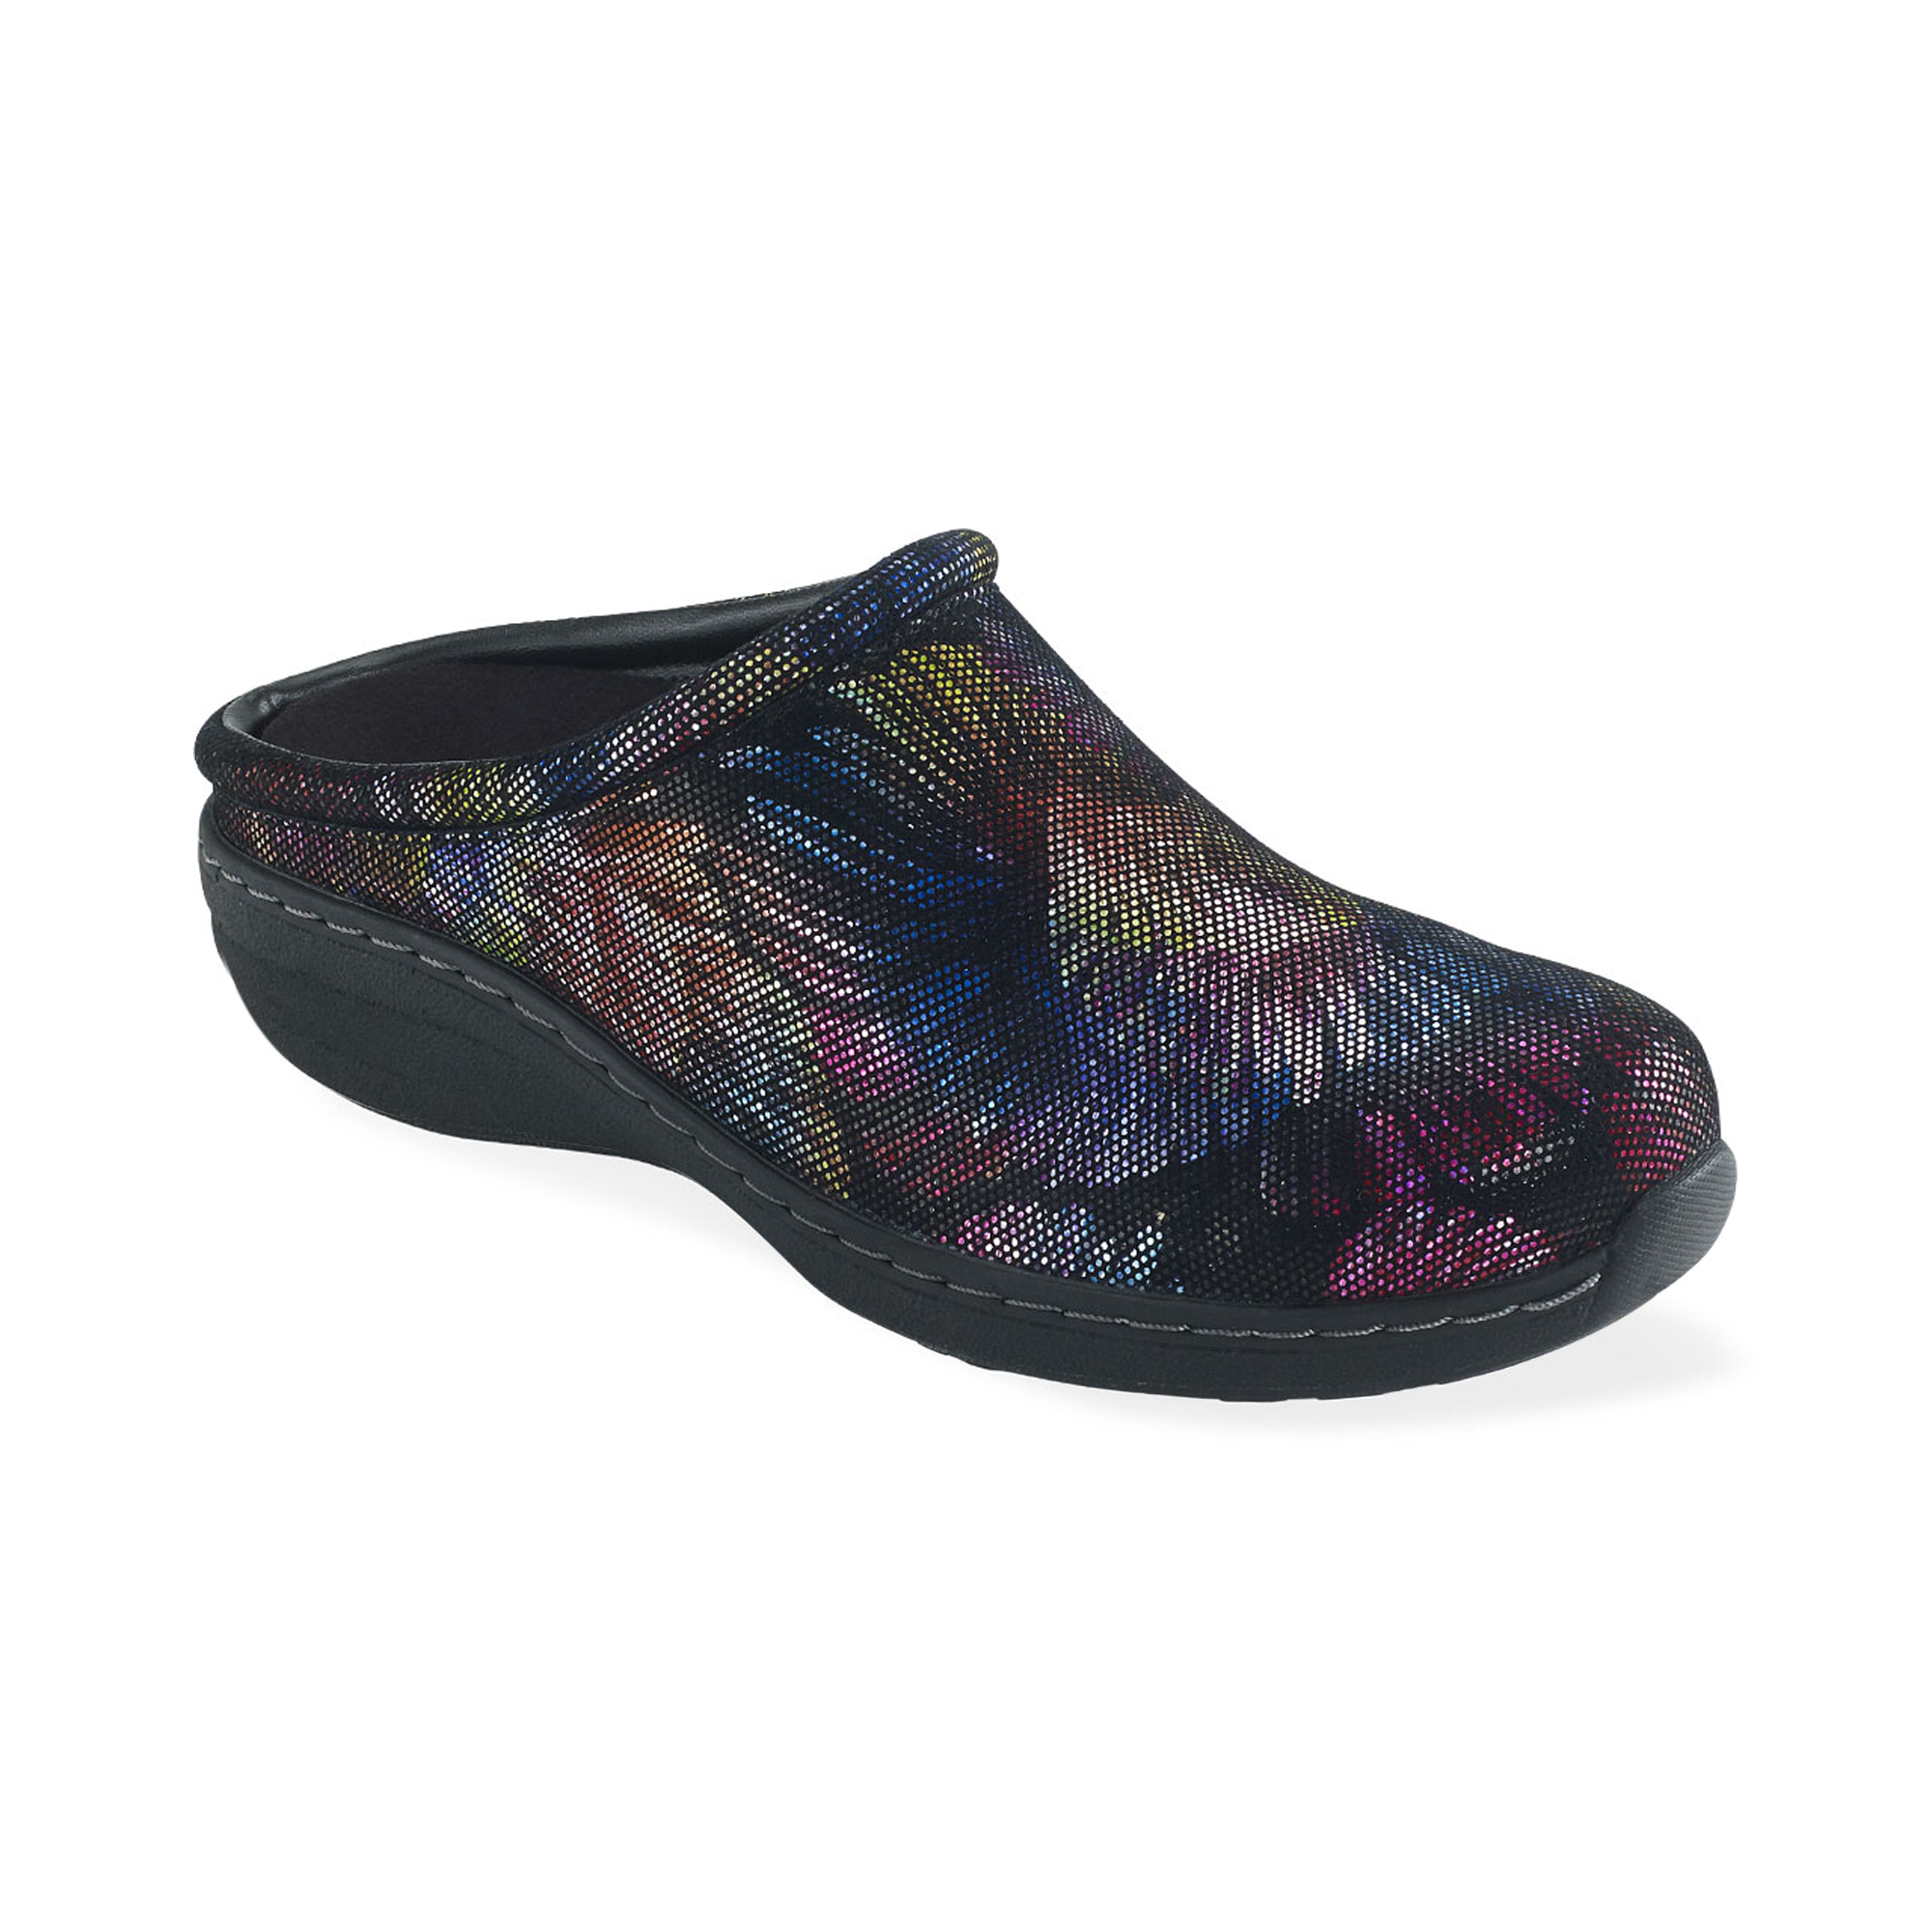 slip on with arch support